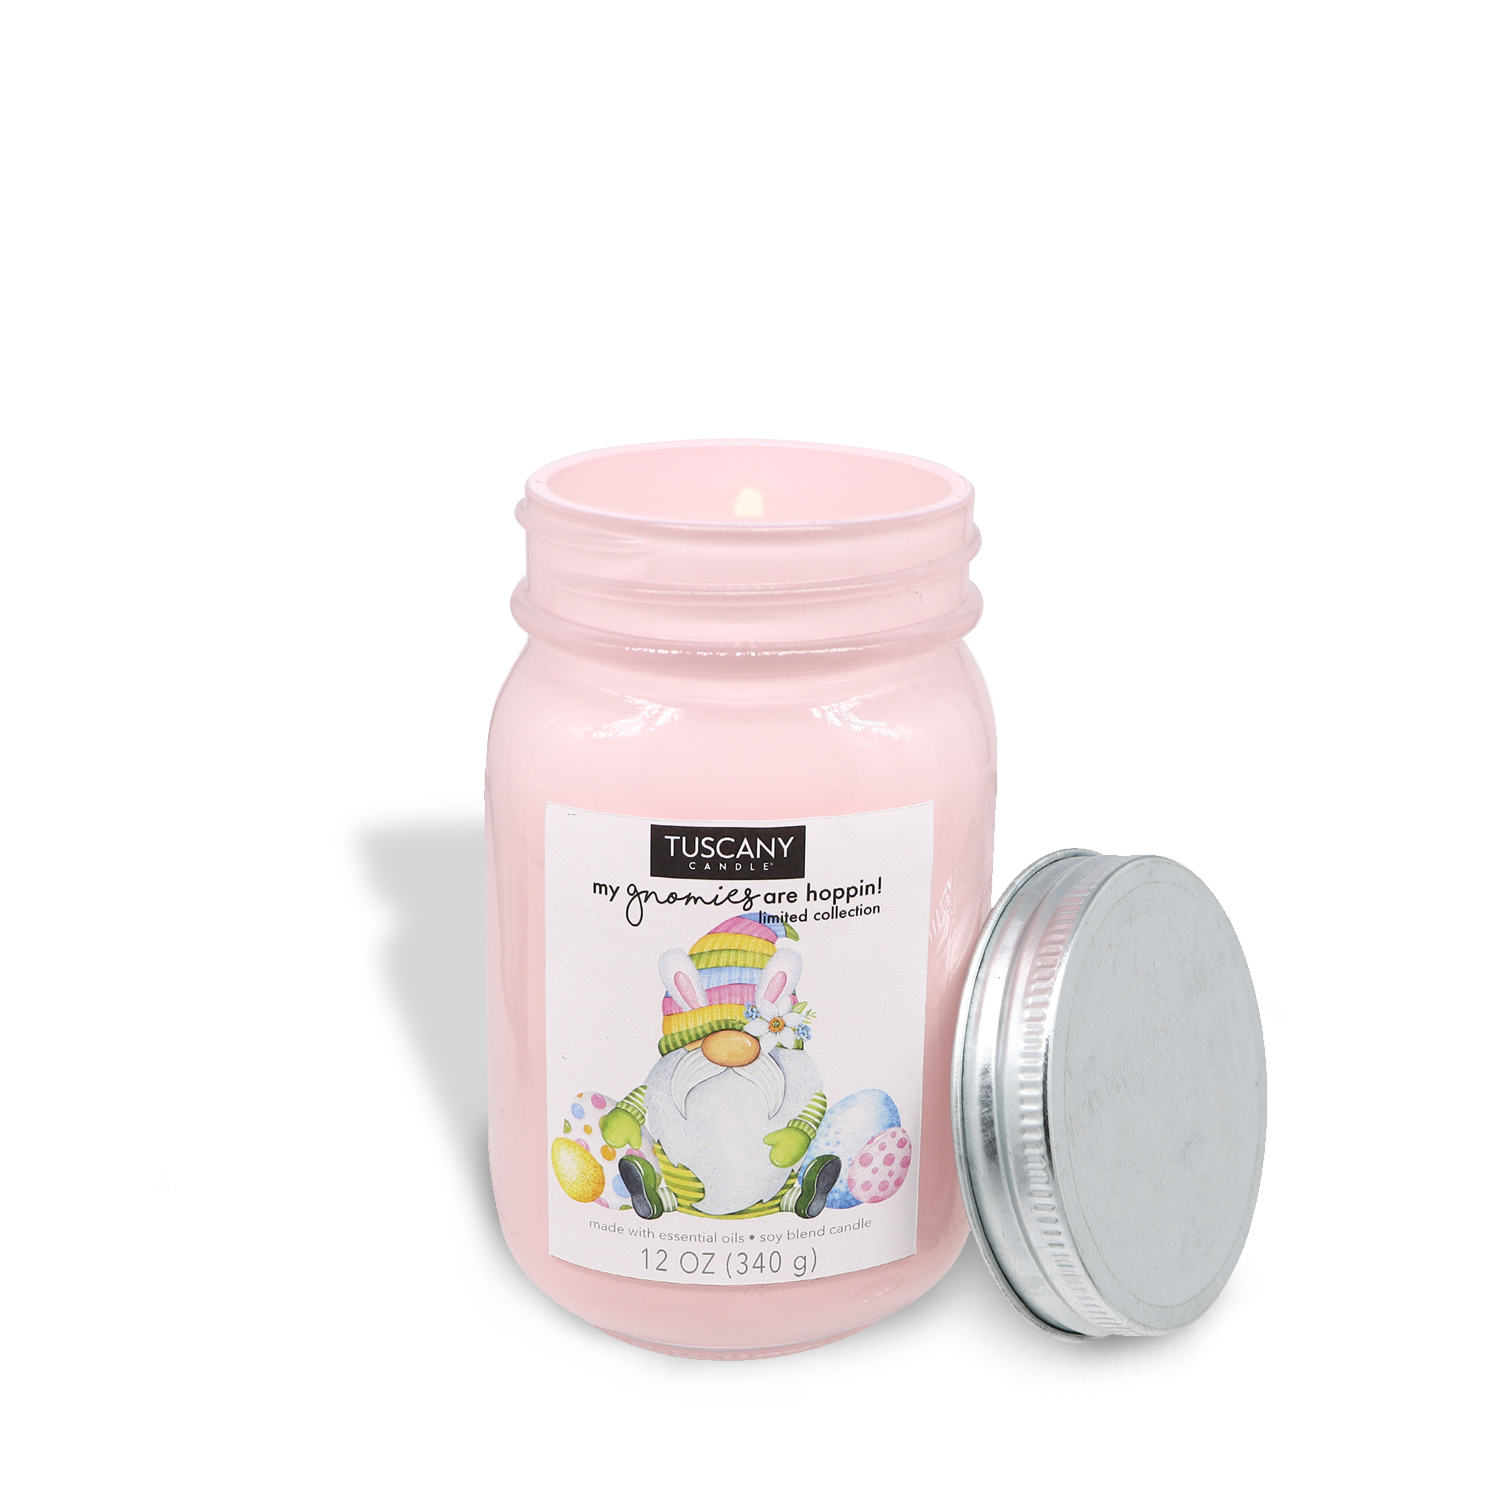 A fresh, floral pink jar of Gnome Bunny Breeze (12 oz) from the My Gnomies Are Hoppin' Collection, by Tuscany Candle® SEASONAL, with an image of an Easter bunny.